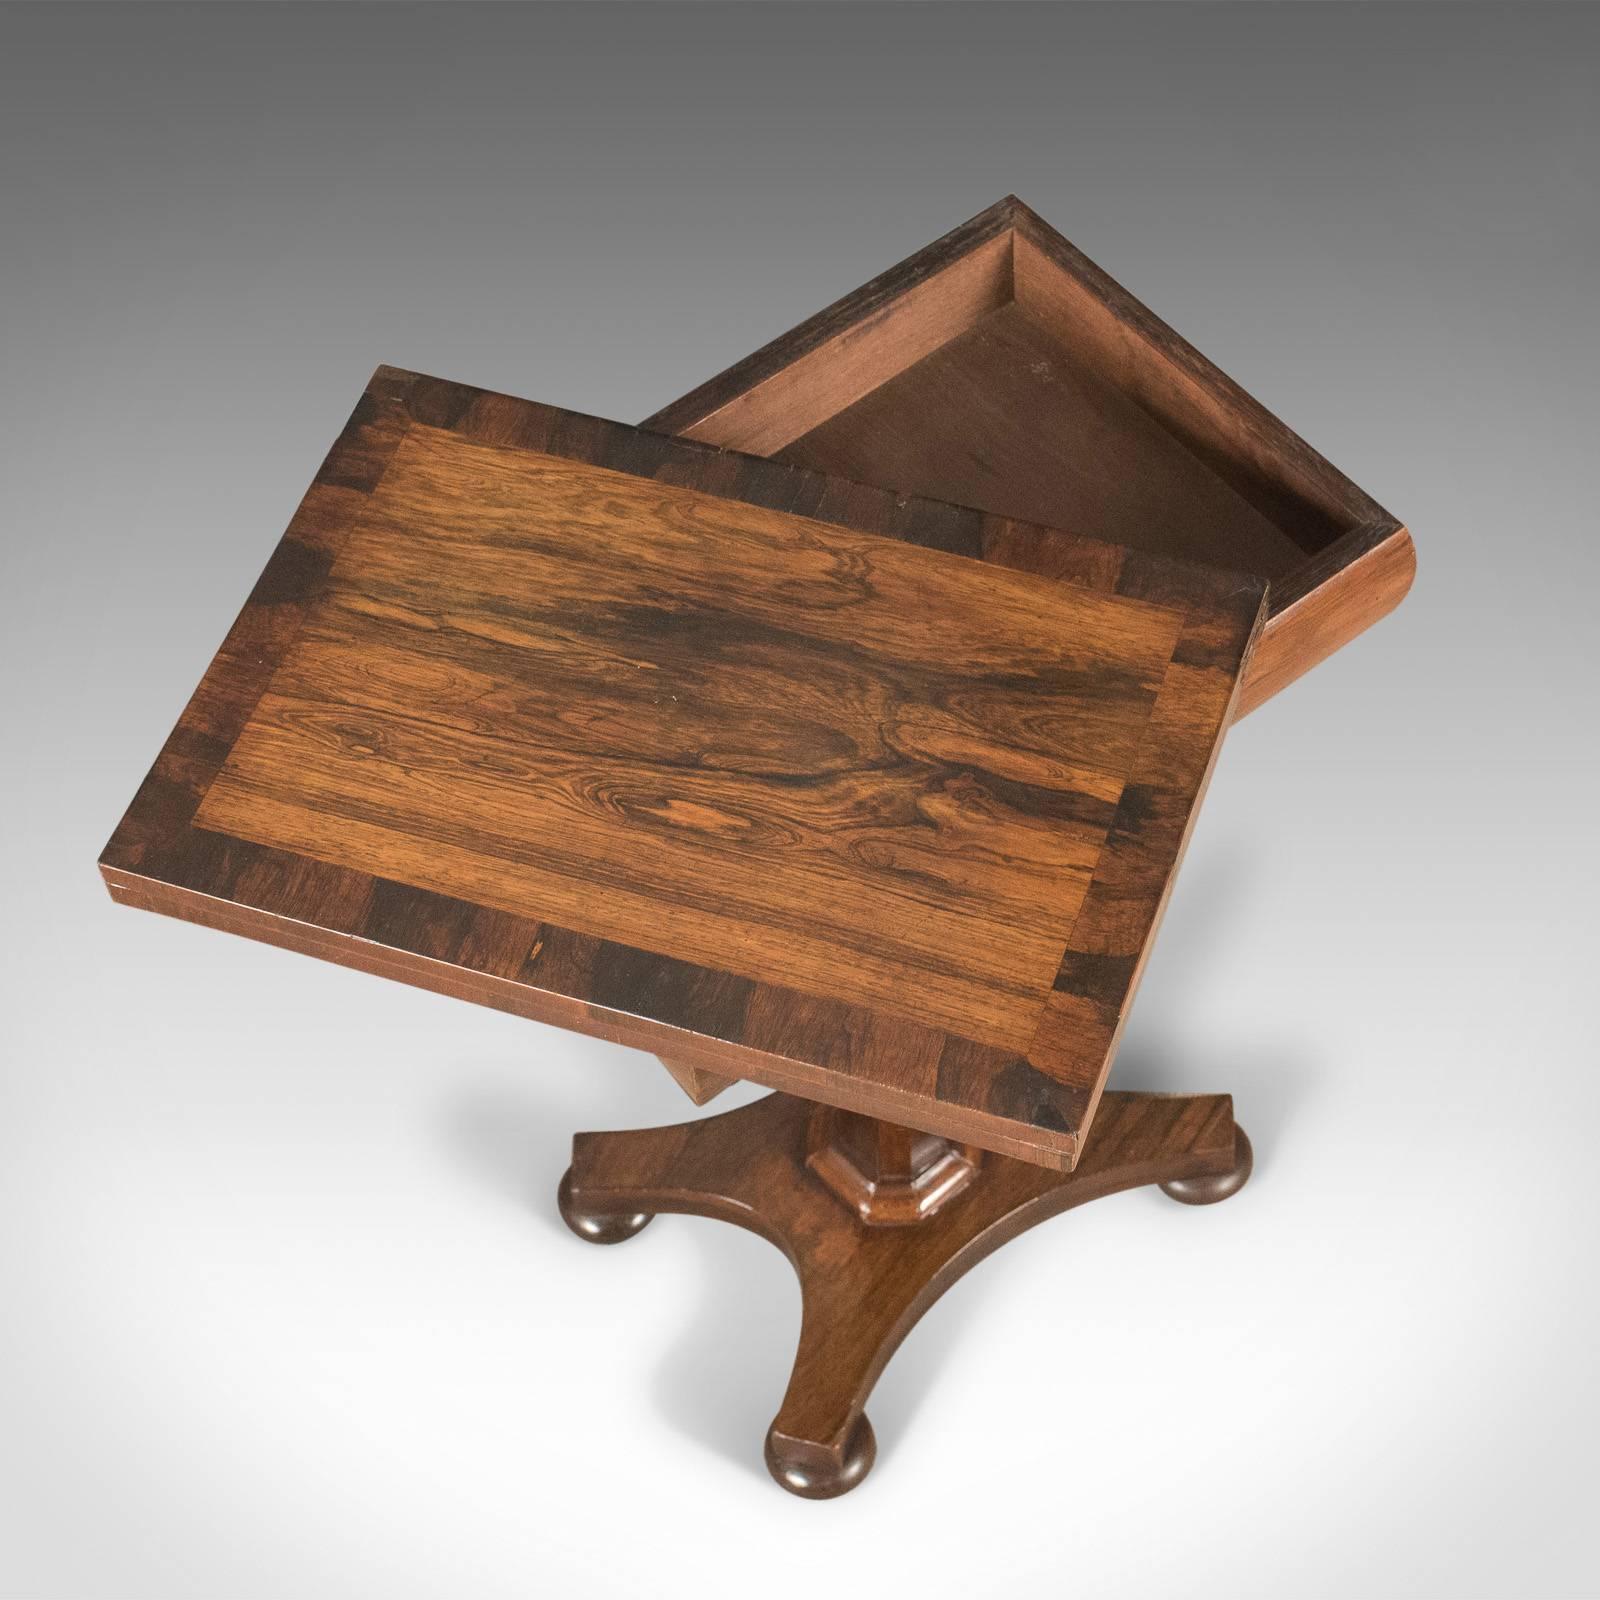 Rosewood Antique Fold over Games Table, English Regency, Chess Board, circa 1820